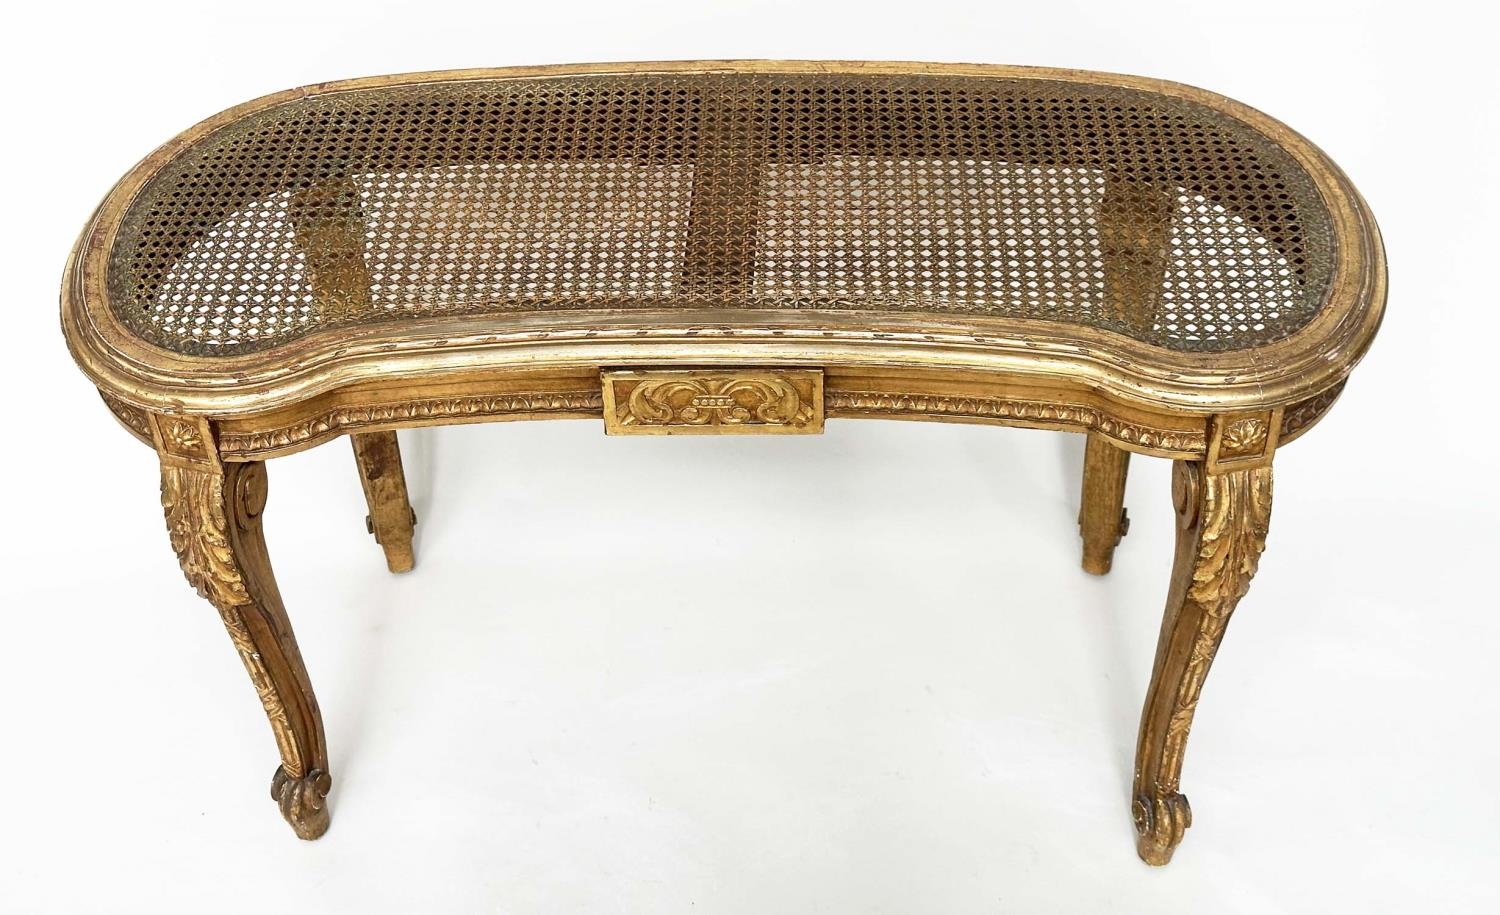 WINDOW SEAT, late 19th century French Louis XVI style giltwood with cane seat and carved tapering - Image 6 of 9